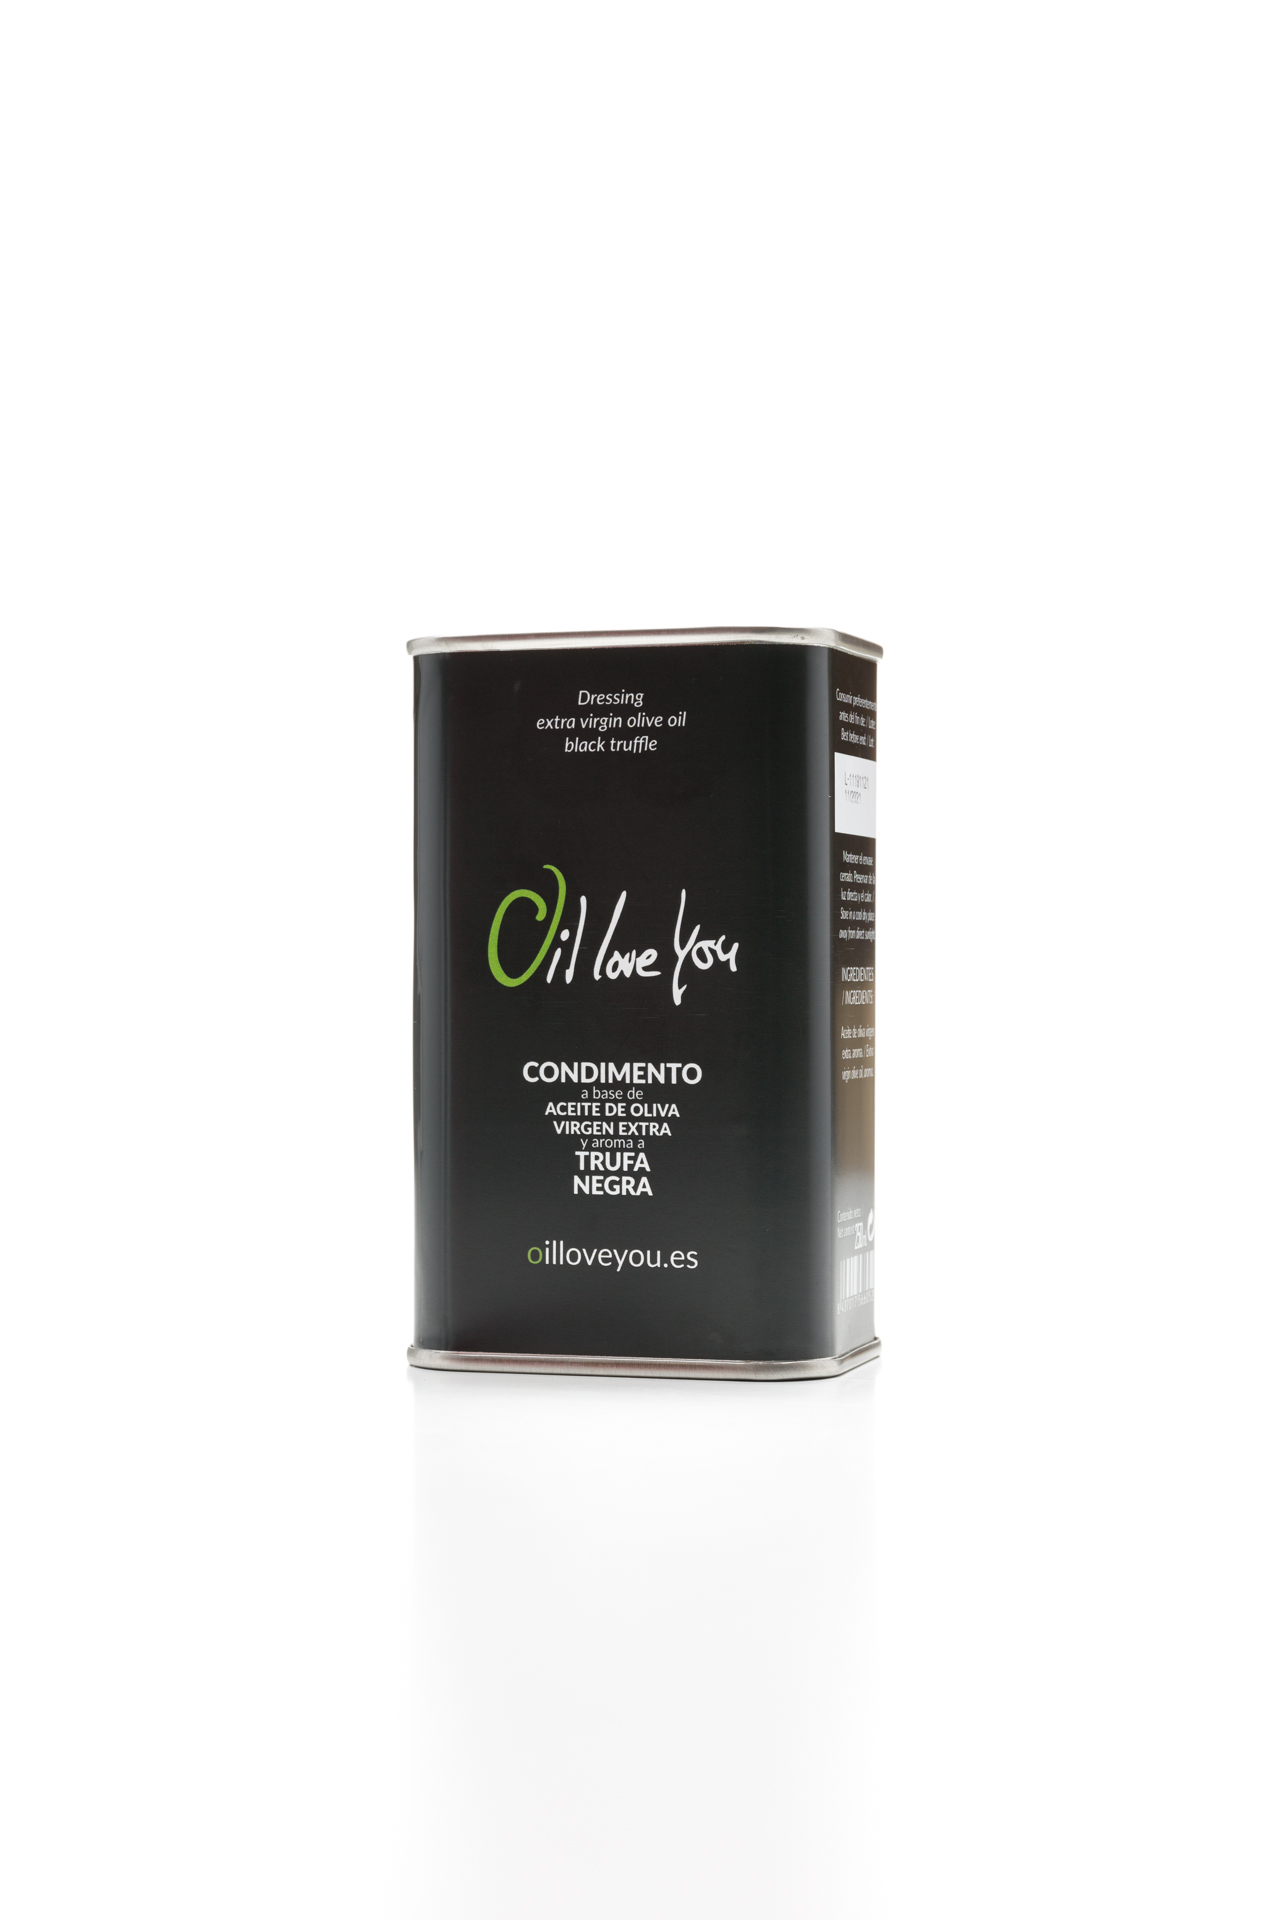 Can of EVOO Oil Love You flavored with black truffle 250 ml oilloveyou (2)